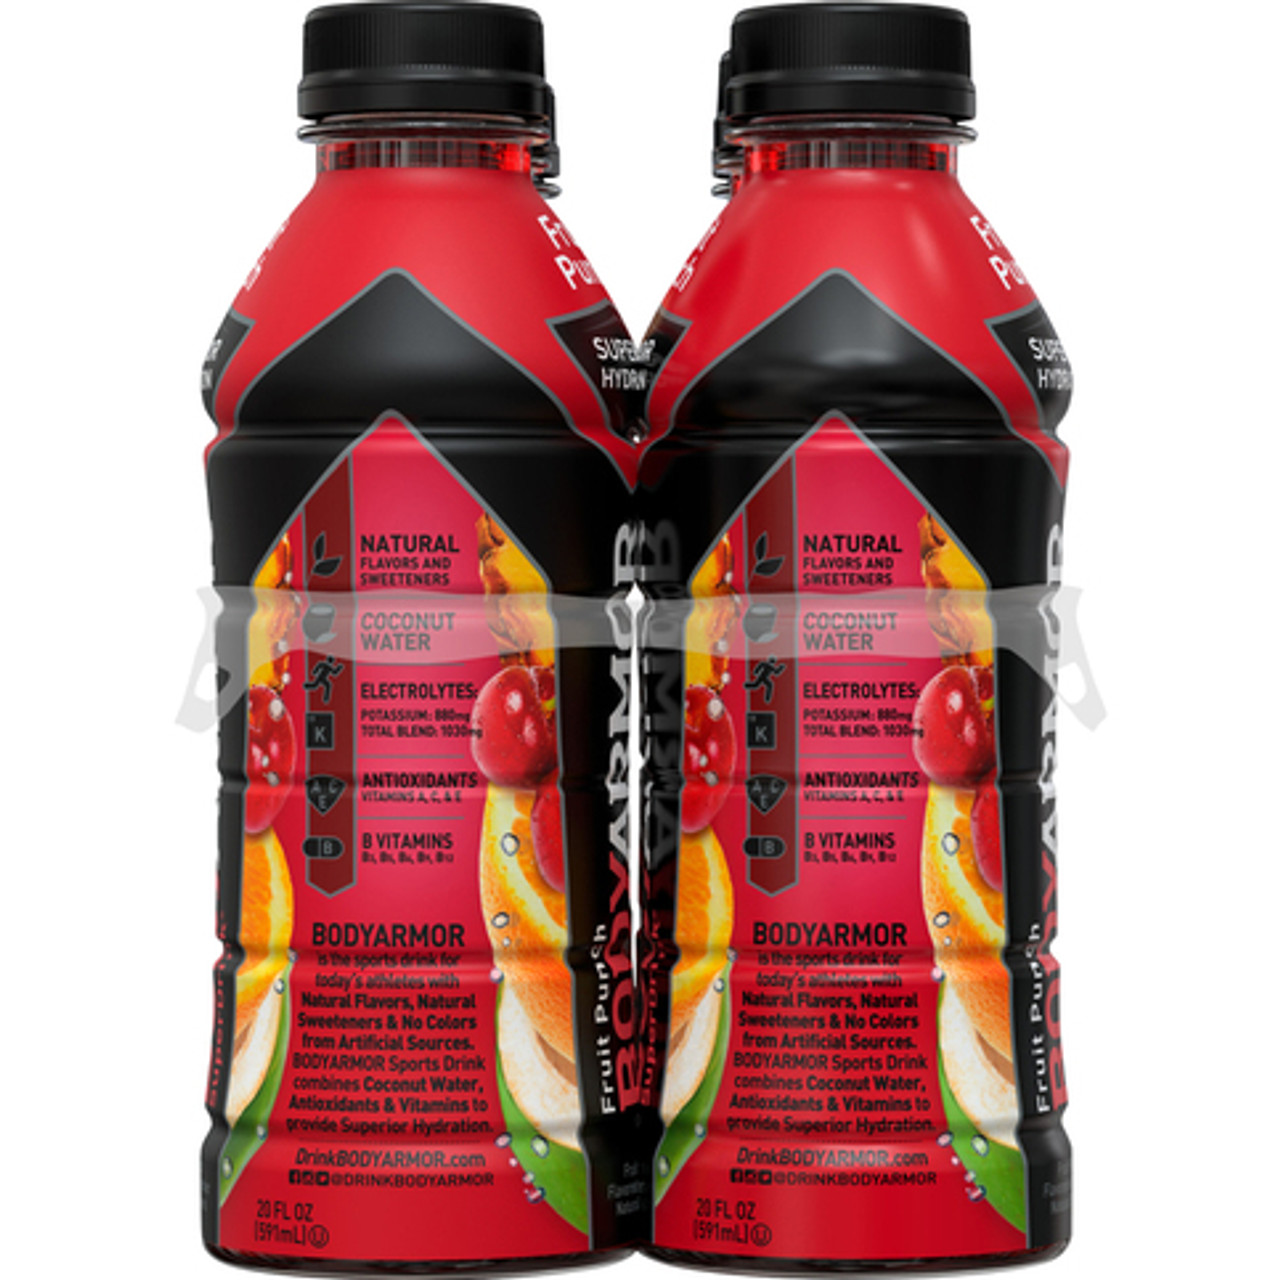 BODYARMOR Sports SuperDrink Coconut Water Hydration Fruit Punch 473ml -12 PACK